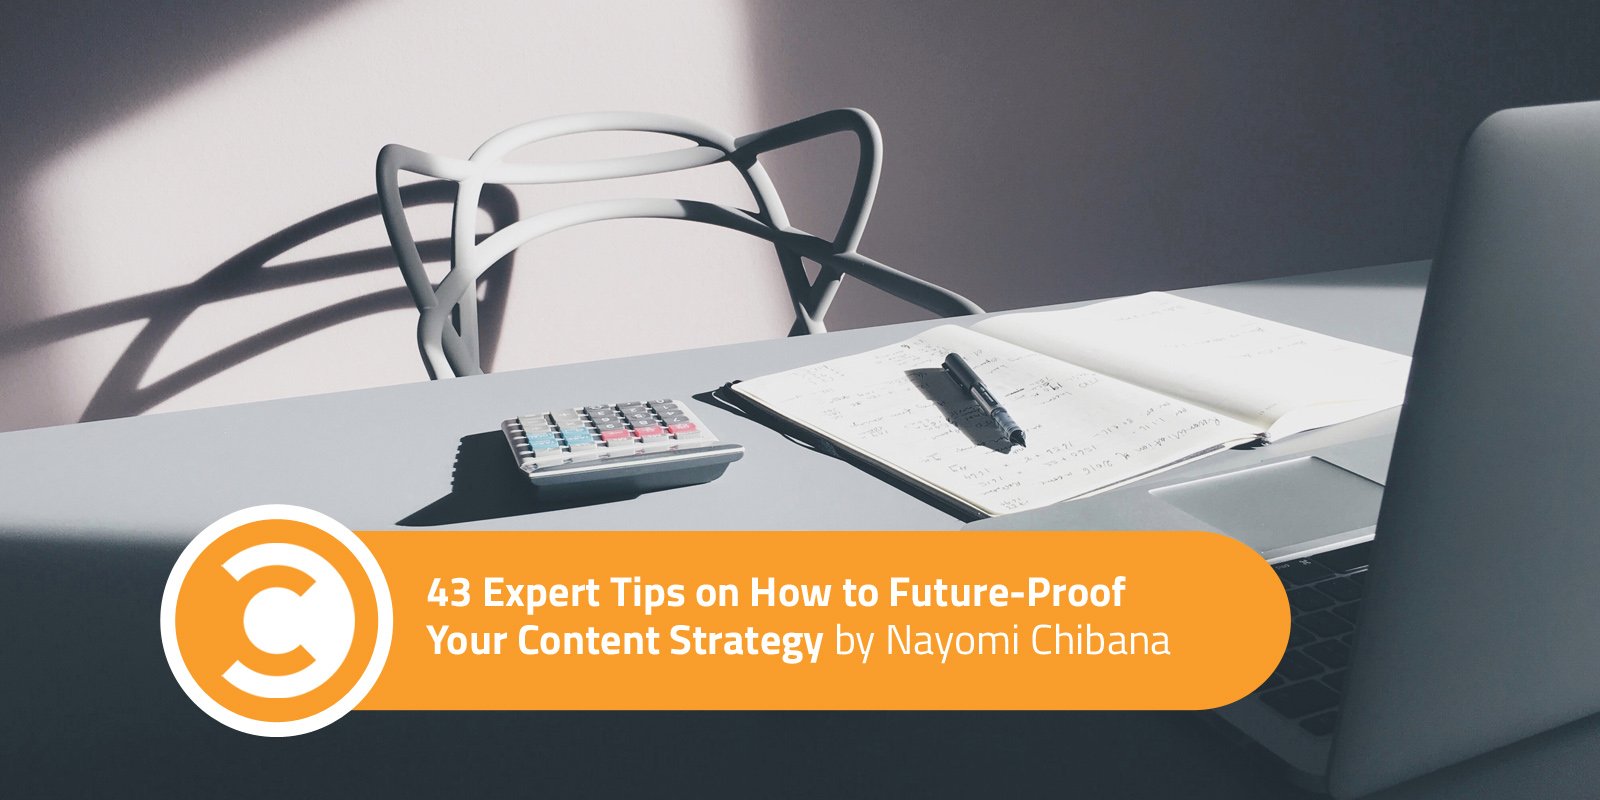 43 Expert Tips on How to Future-Proof Your Content Strategy